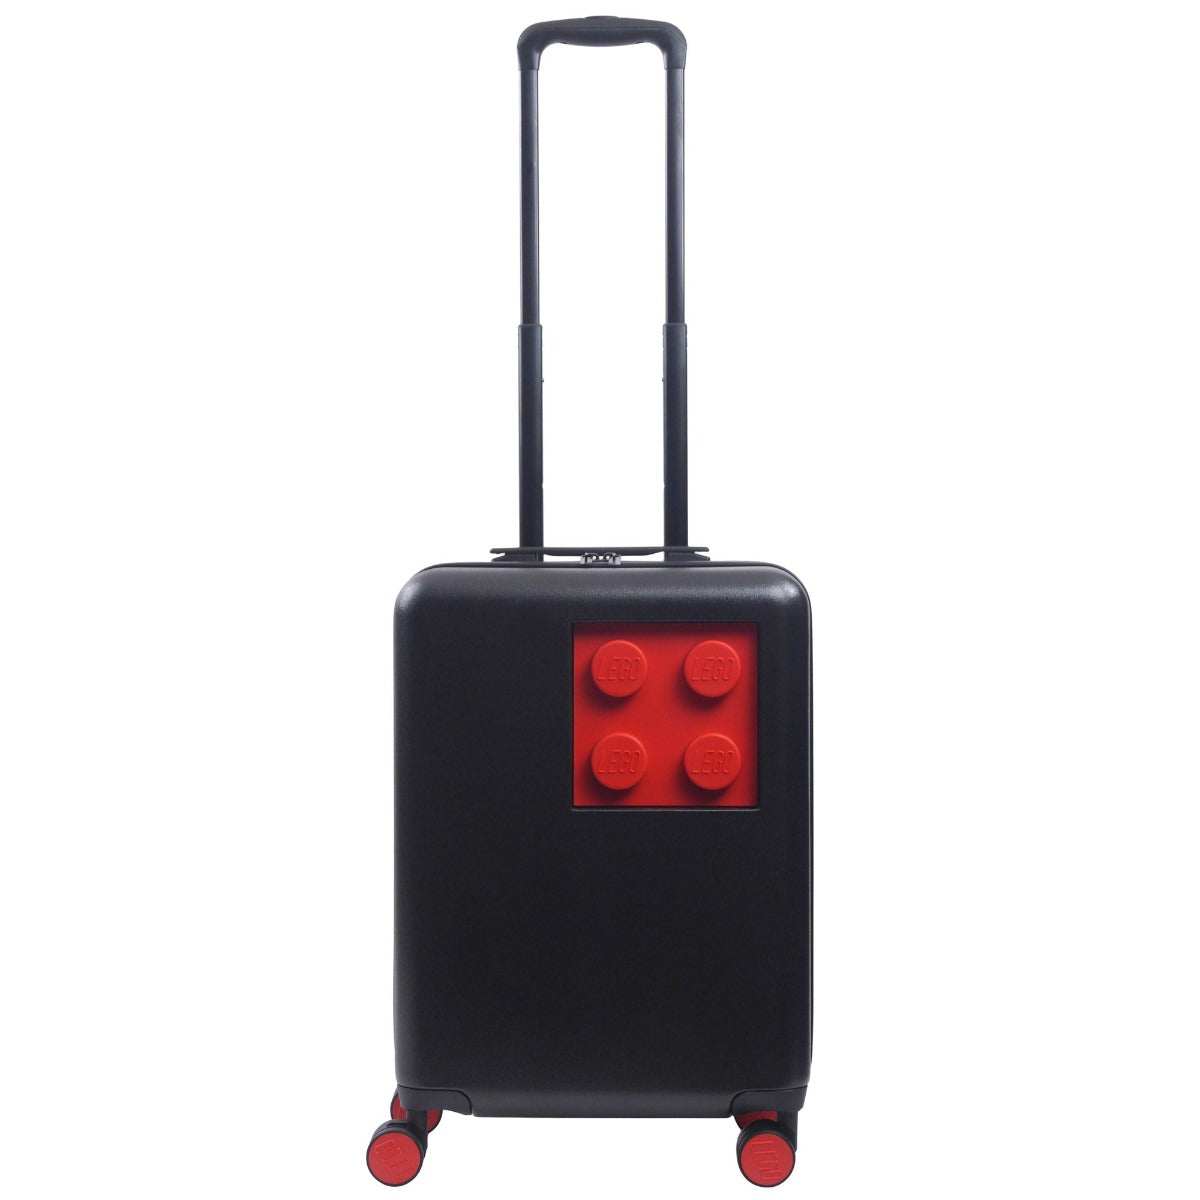 Lego Signature Brick 2X2 black red 21" carry-on rolling luggage